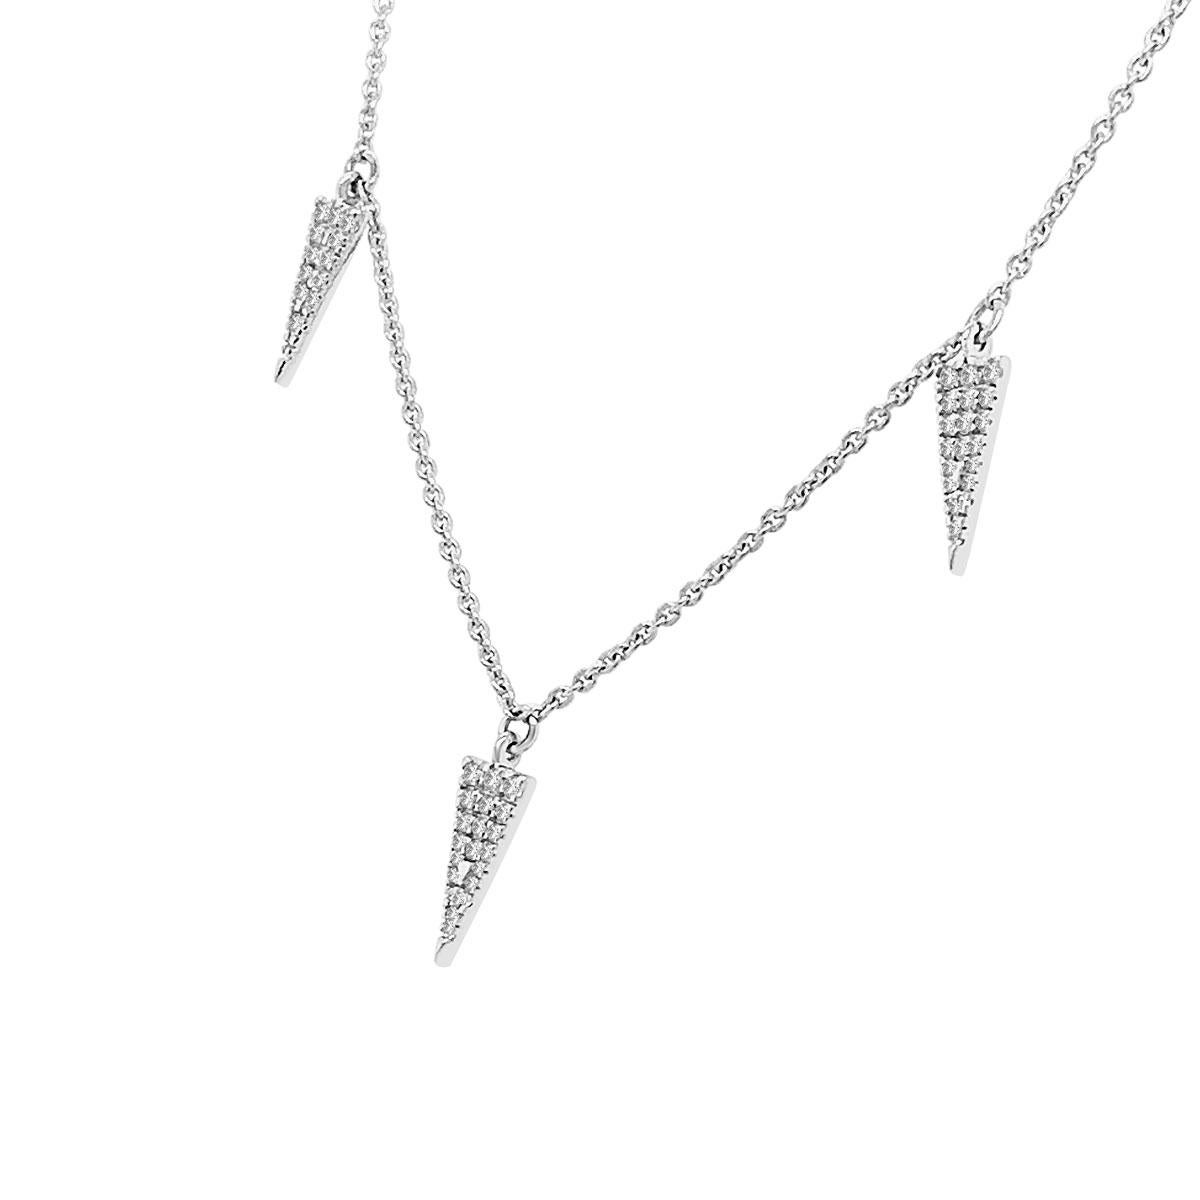 This elegant necklace features 100 brilliants diamond micro-prong set in 5 spear-shaped pendants linked to each other via delicate loops. Experience The Difference in Person!

Product details: 

Center Gemstone Type: NATURAL DIAMOND
Center Gemstone